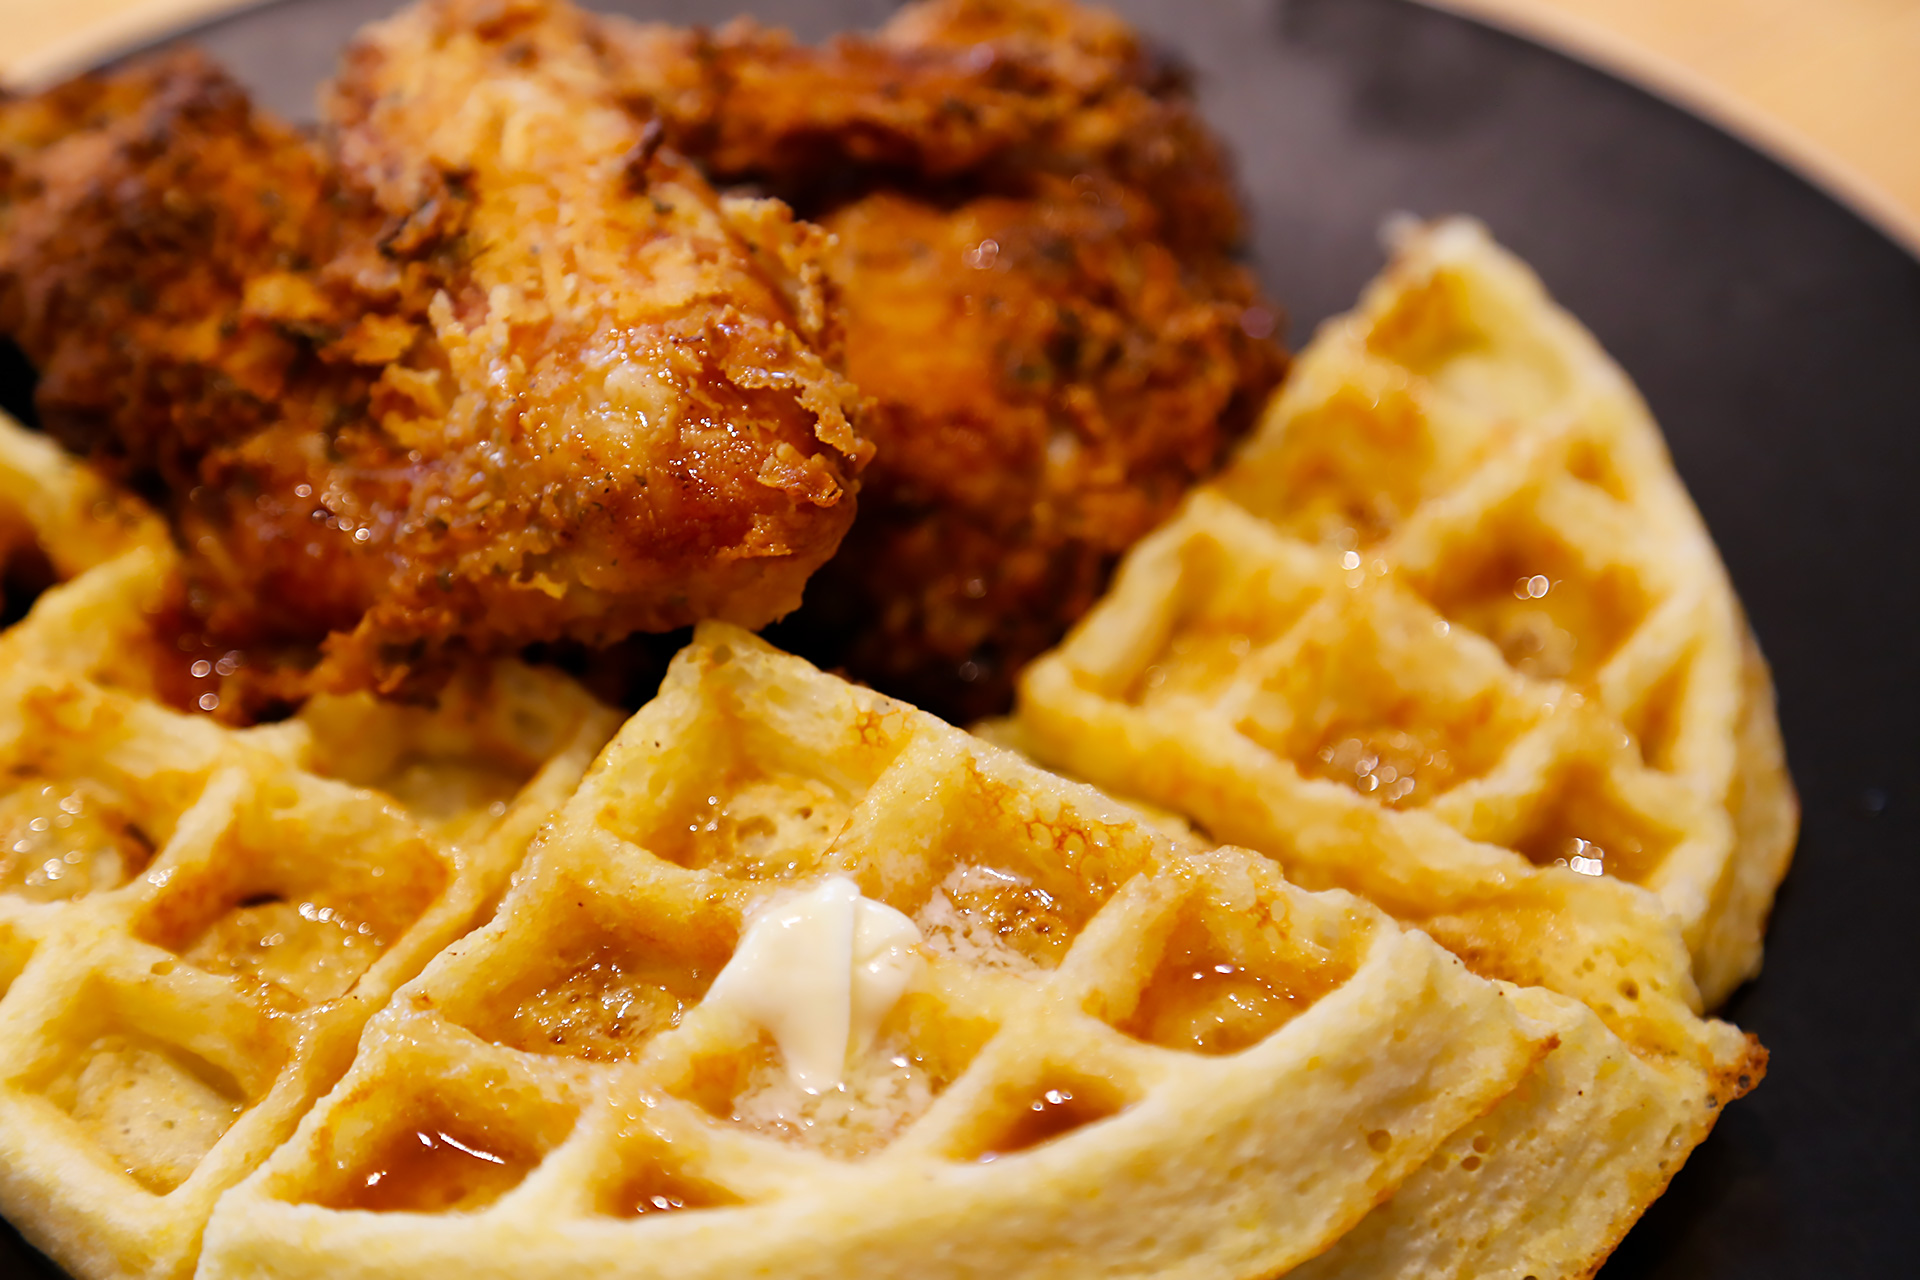 Serve Buttermilk Fried Chicken with Cornmeal Waffles and Apple Cider Syrup.